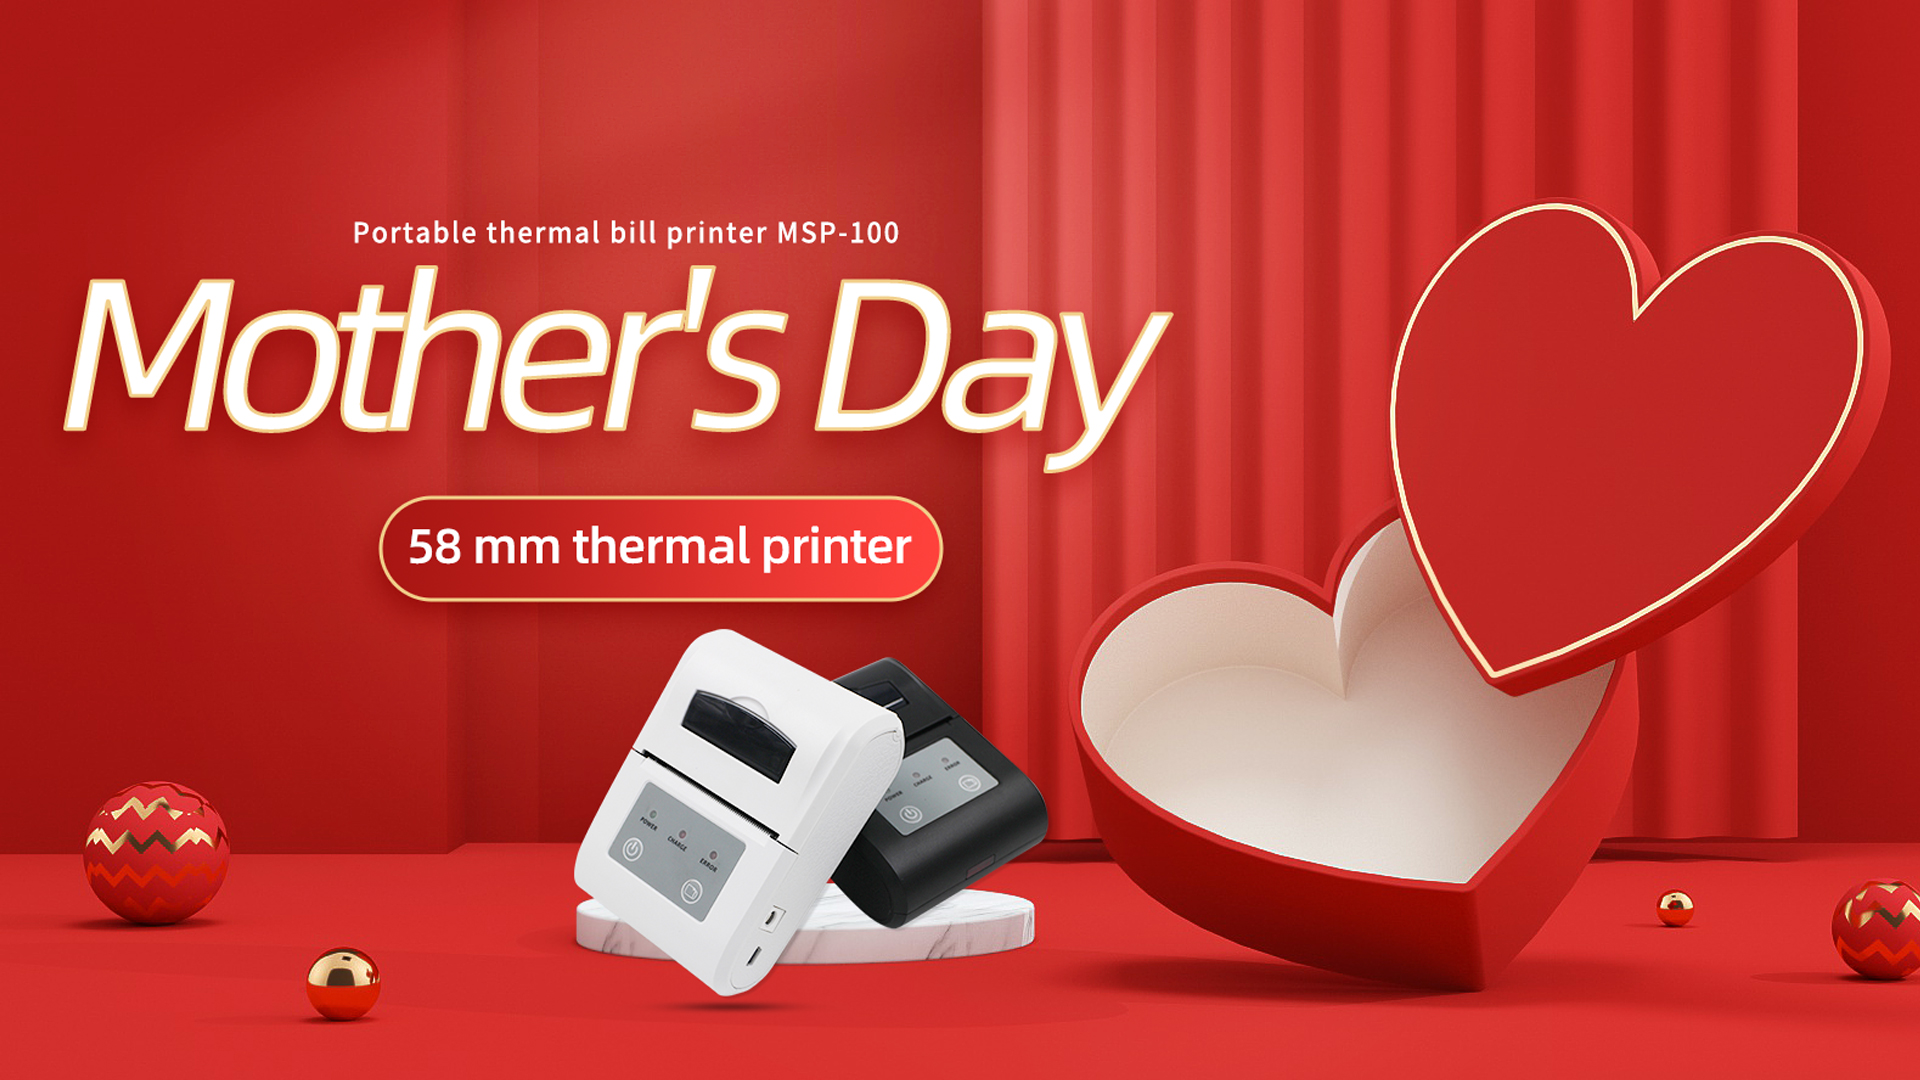 Traffic tickets for Mother's Day, do you know which printer to choose?